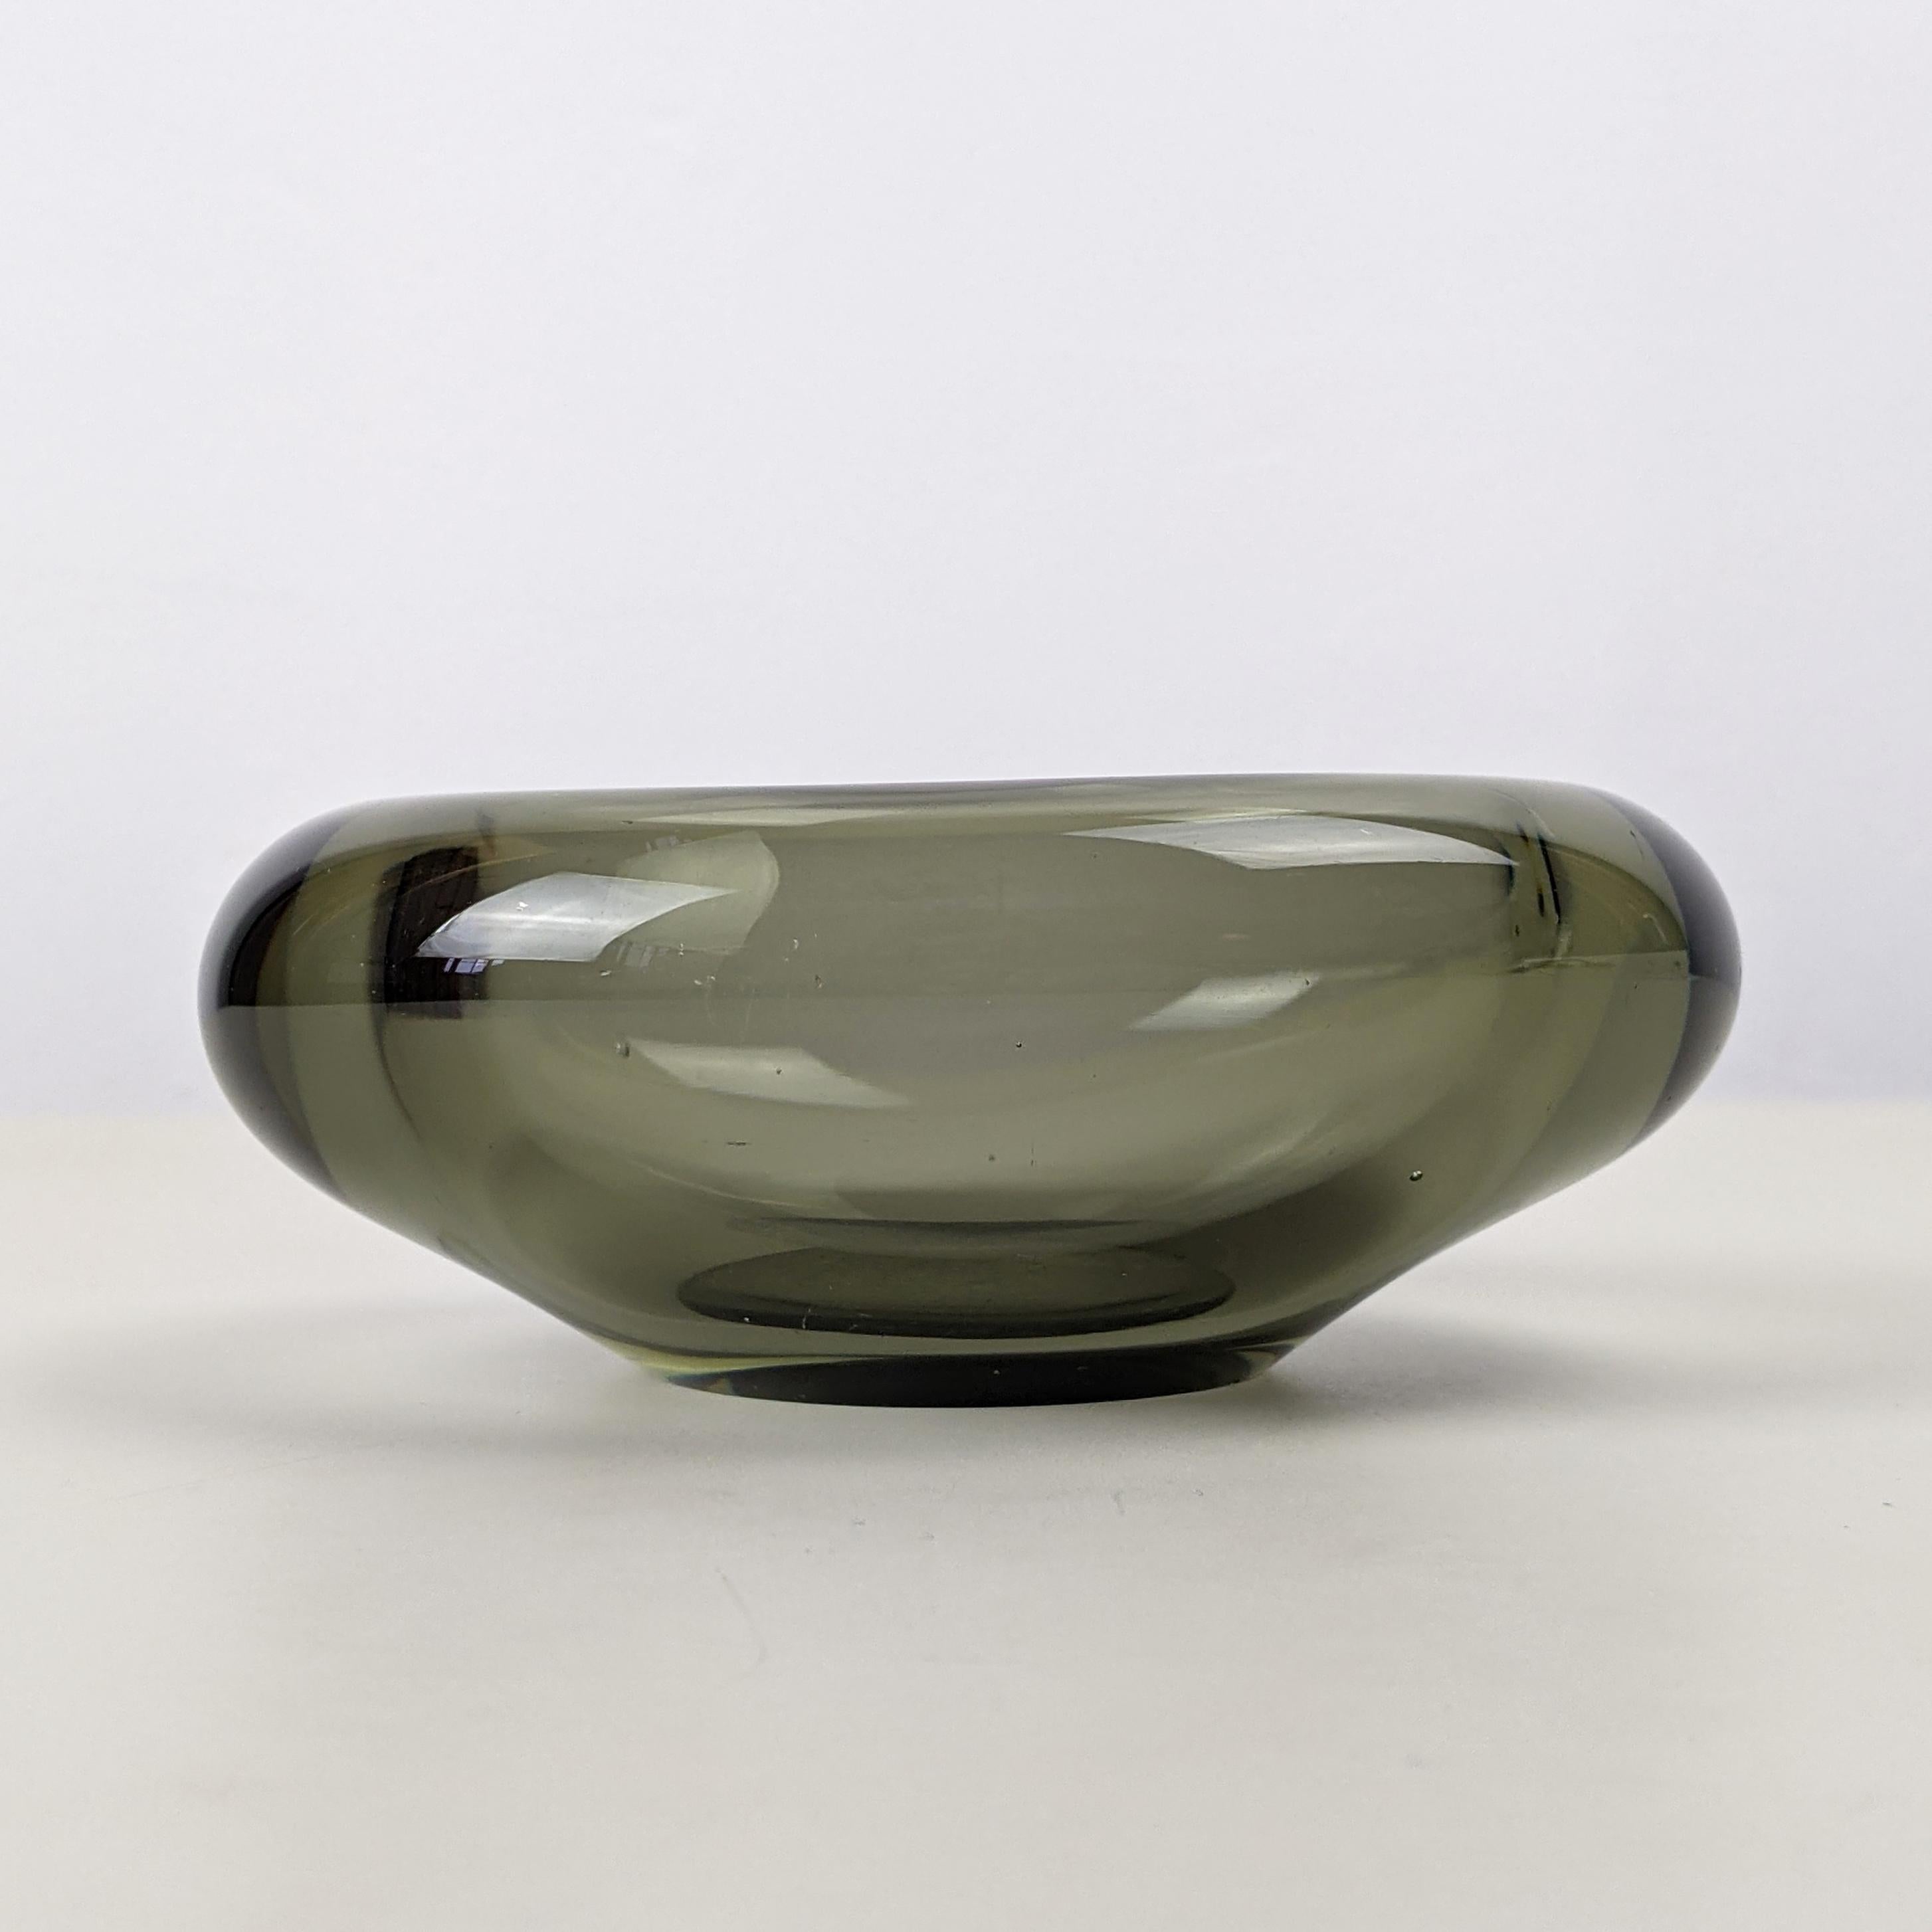 Per Lütken for Holmegaard
Small glass bowl, designed 1957, this example from 1961

Clear grey-tinted blown glass
Underside engraved 'PL 1961 Holmegaard'
Good condition with a few minor scratches

Dimensions, approx..:
Length 12cm, width 9cm,